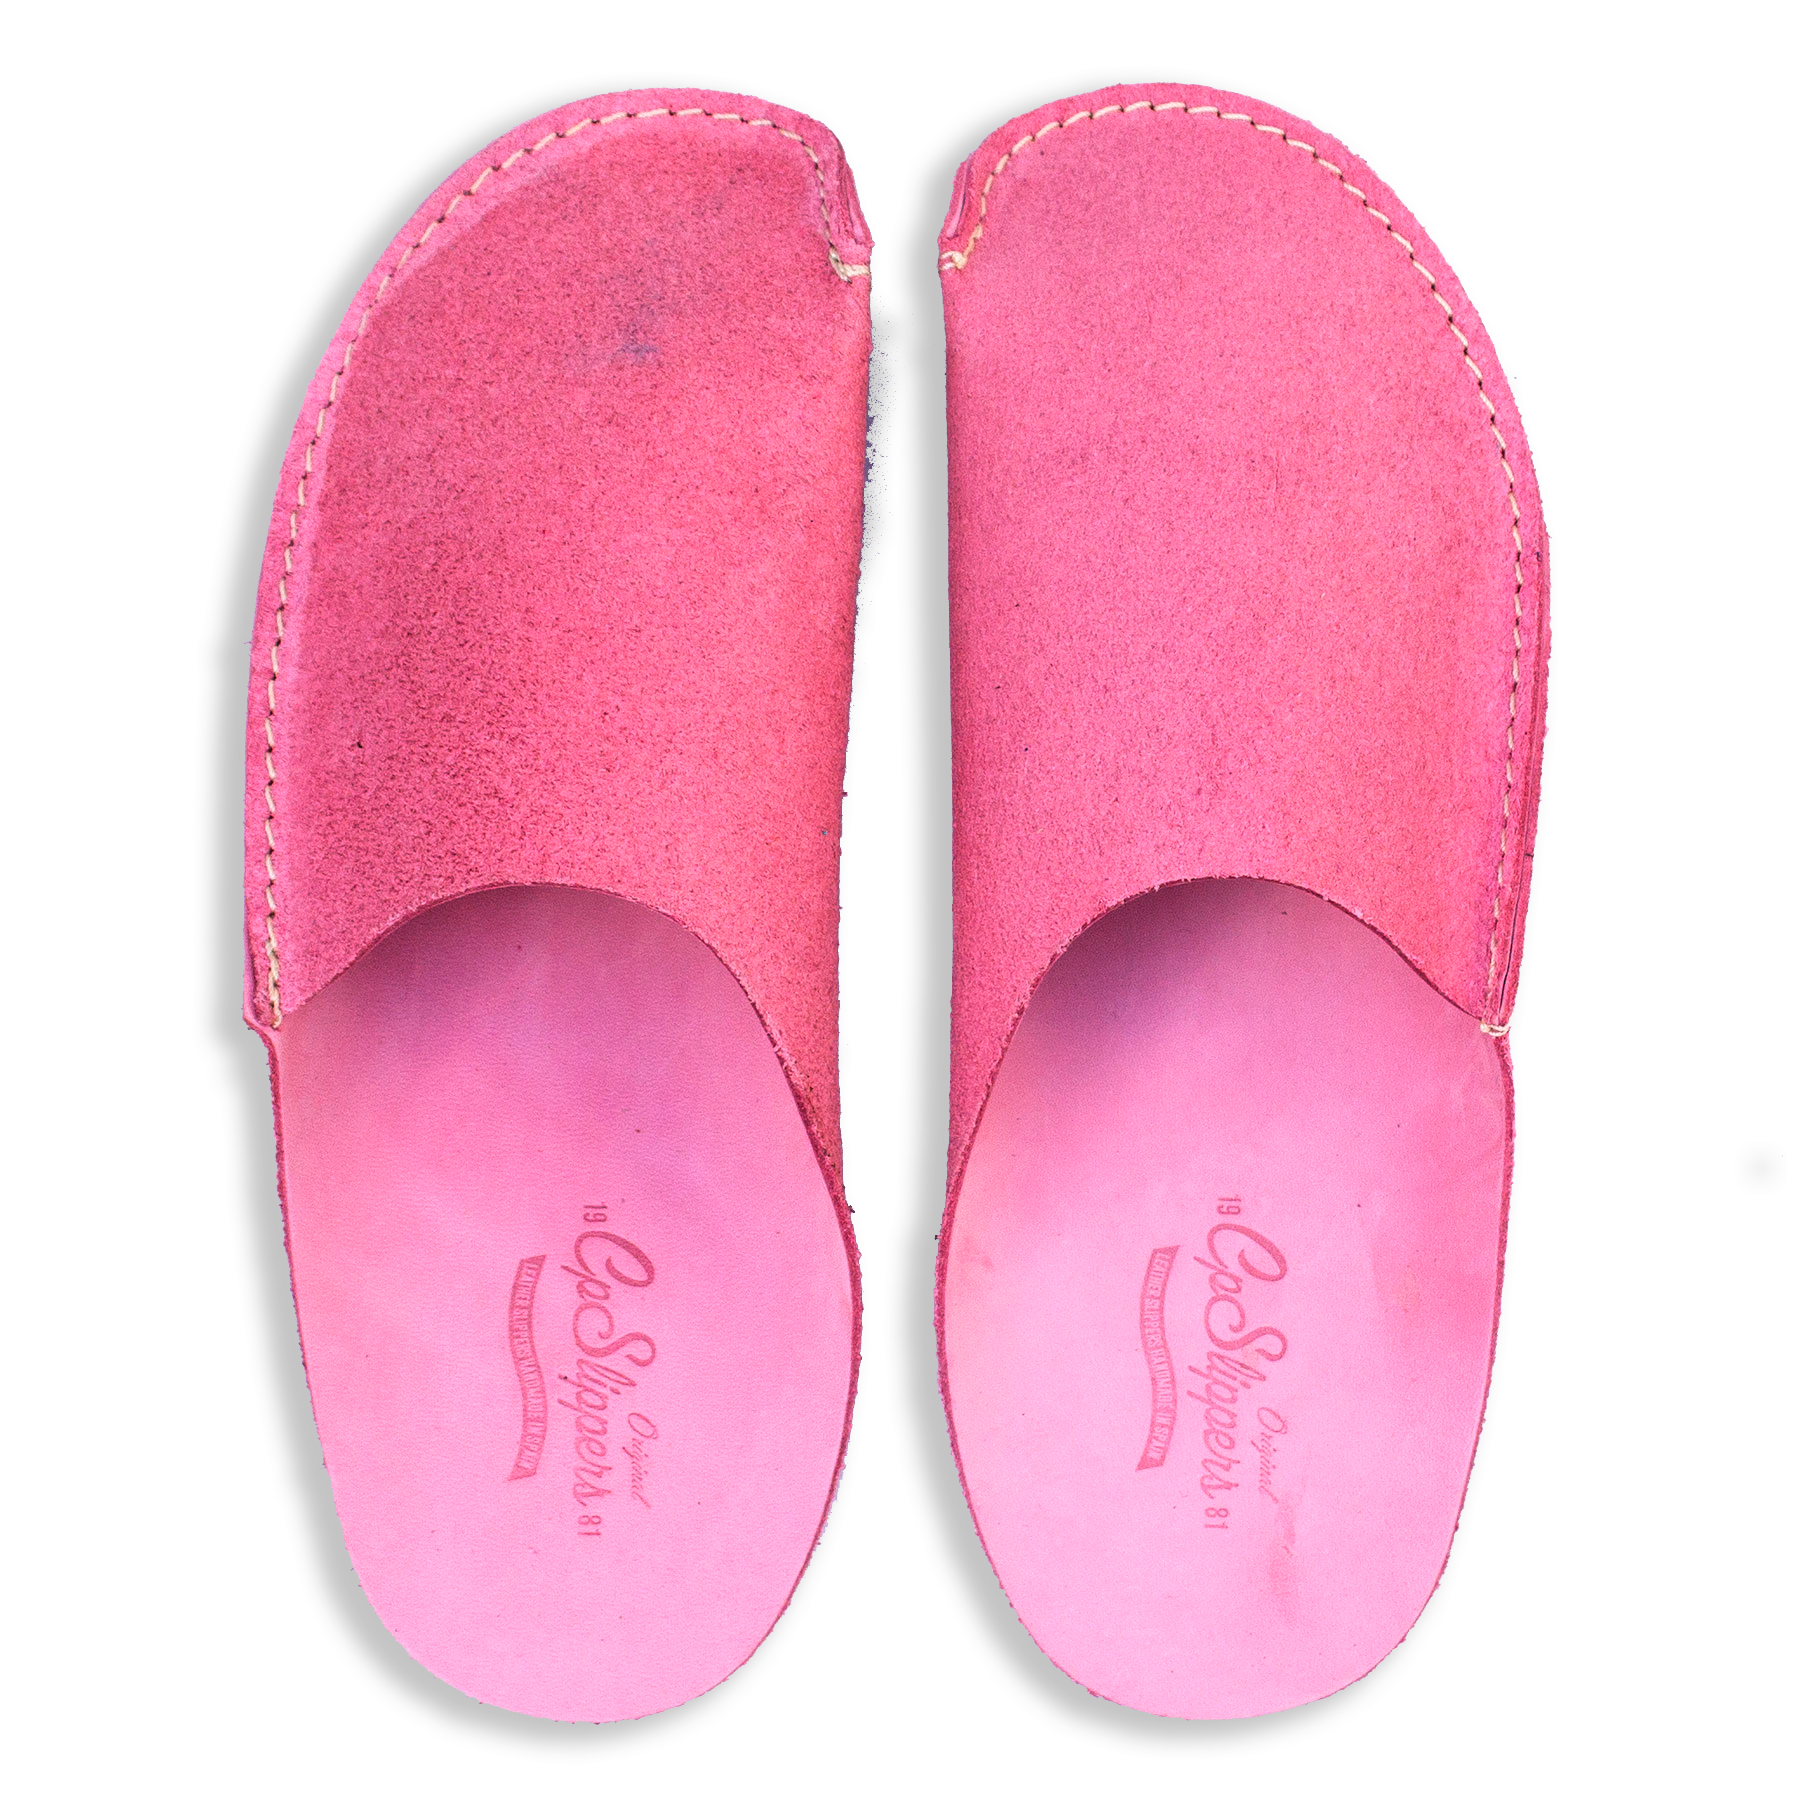 Leather Slippers for women by CP Slippers Minimalist